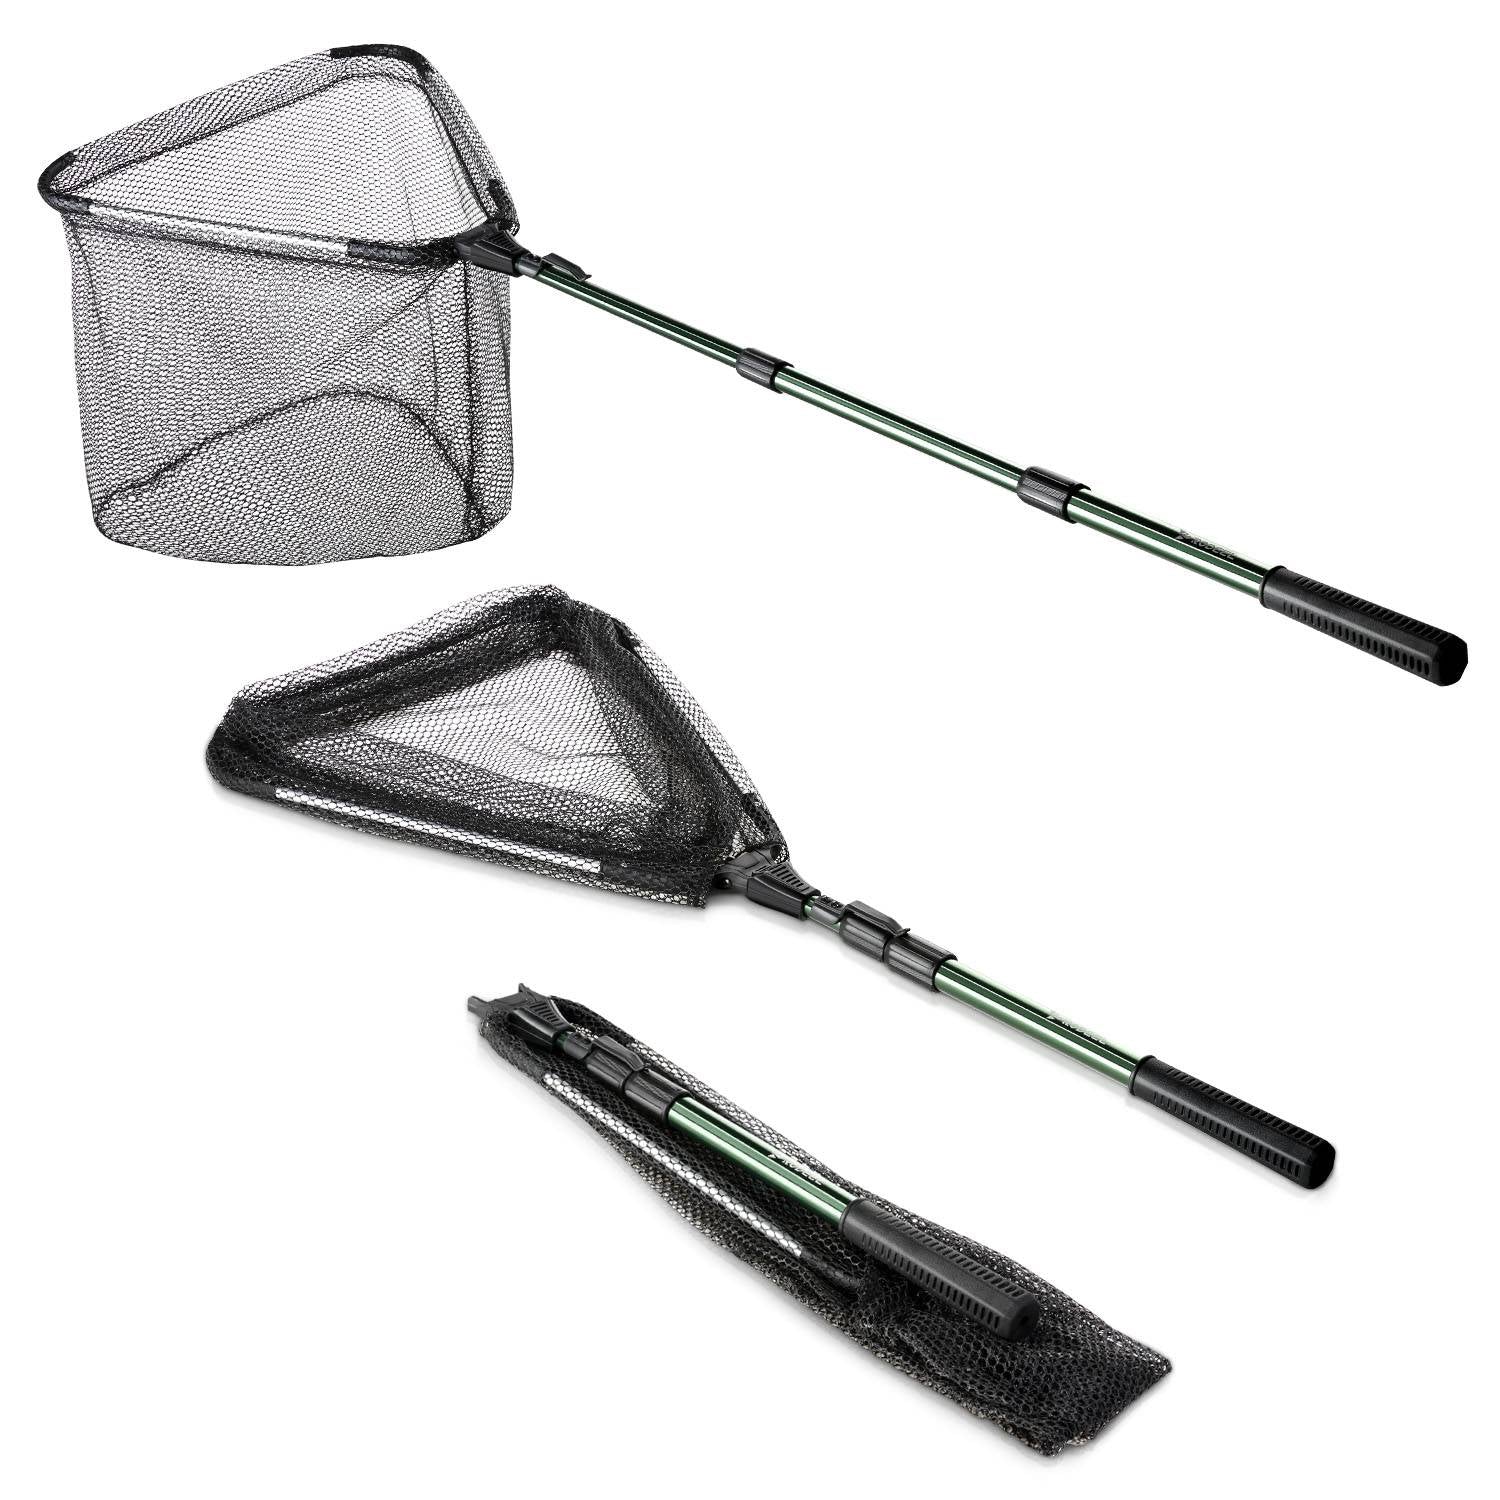 OKBY Landing Net Head, Telescopic Quick Dry Foldable Dip Nets, Portable  Mesh Carp Net, Outdoor Fishing Gear Accessory for Anglers